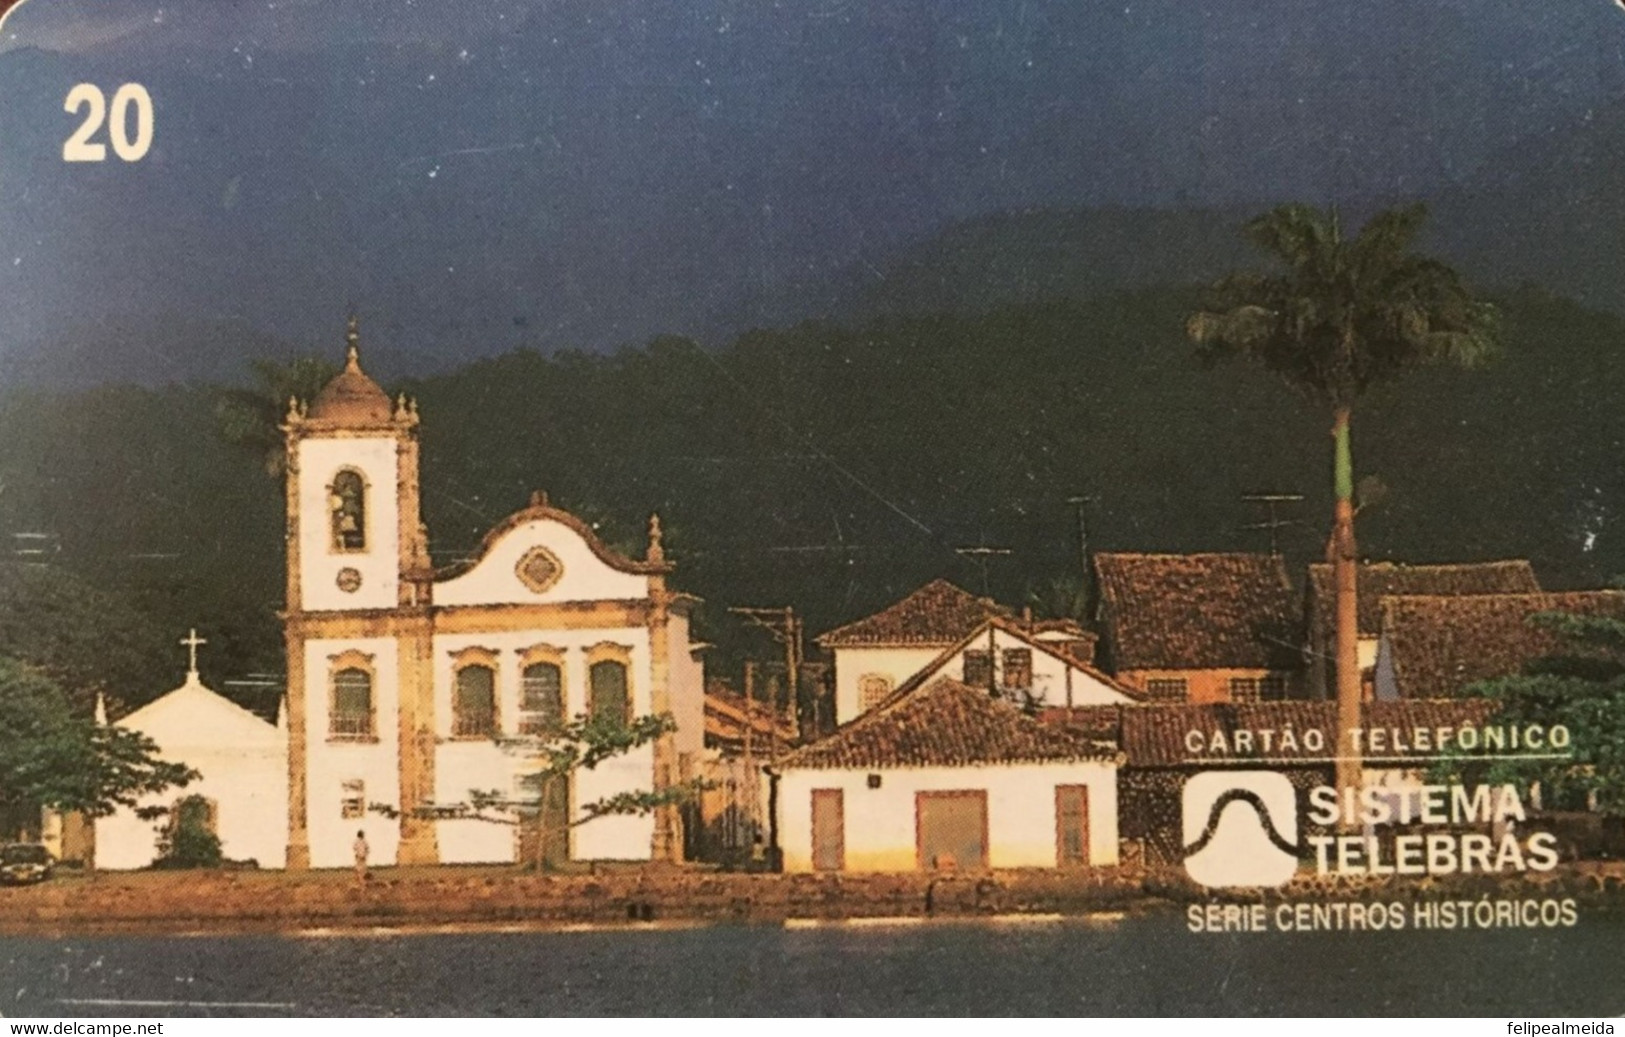 Phone Card Produced By Telebras In 1999 - Series Historic Centers - Photo Of The Building Of The National Historic Museu - Culture